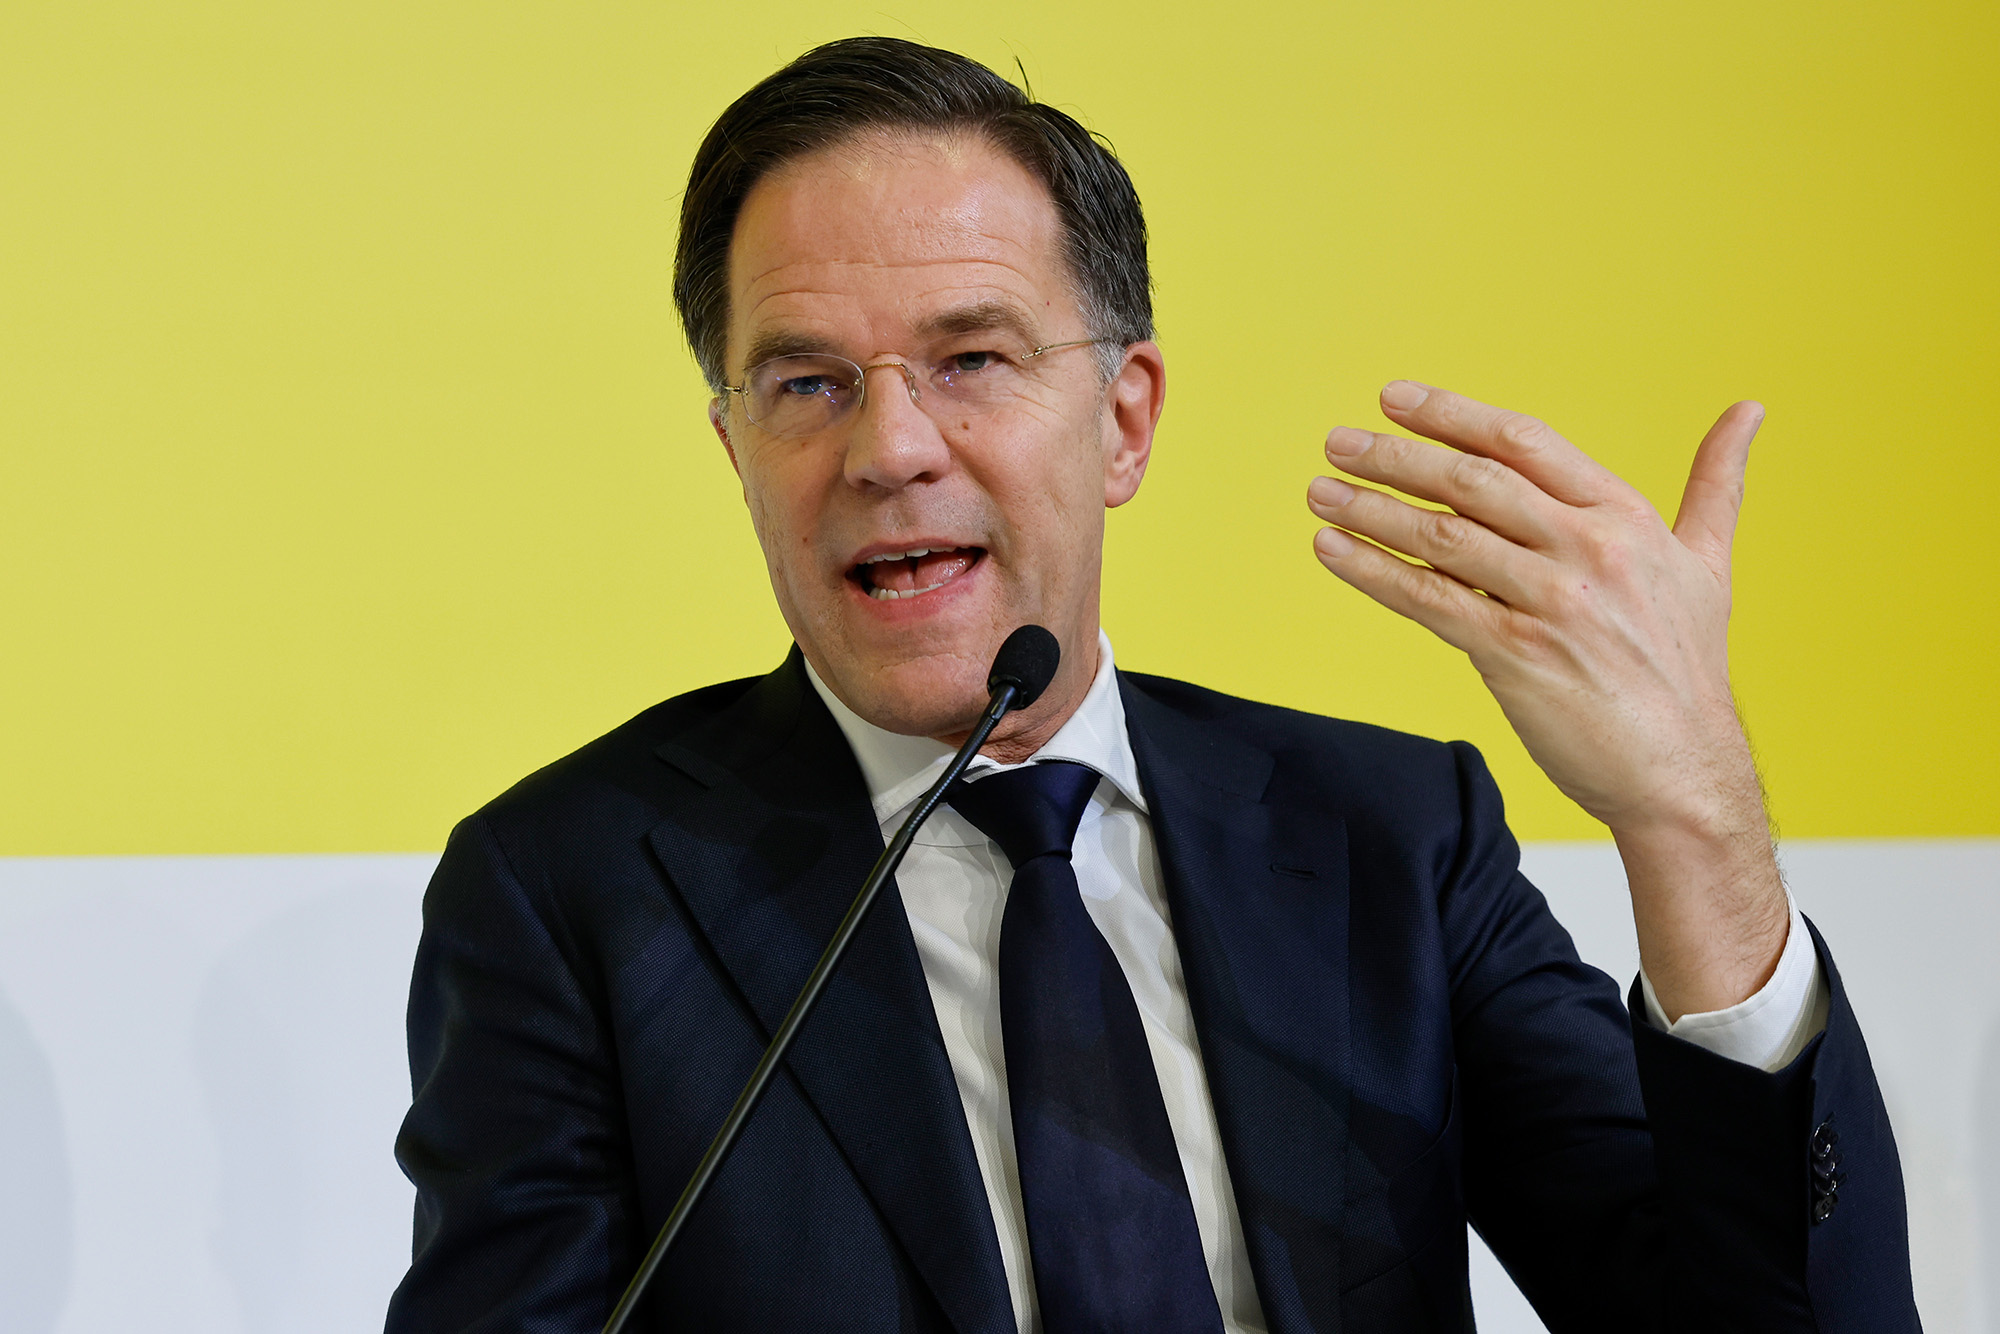 Mark Rutte, Netherlands prime minister, speaks an event on the sidelines on day three of the World Economic Forum (WEF) in Davos, Switzerland, on January 19.